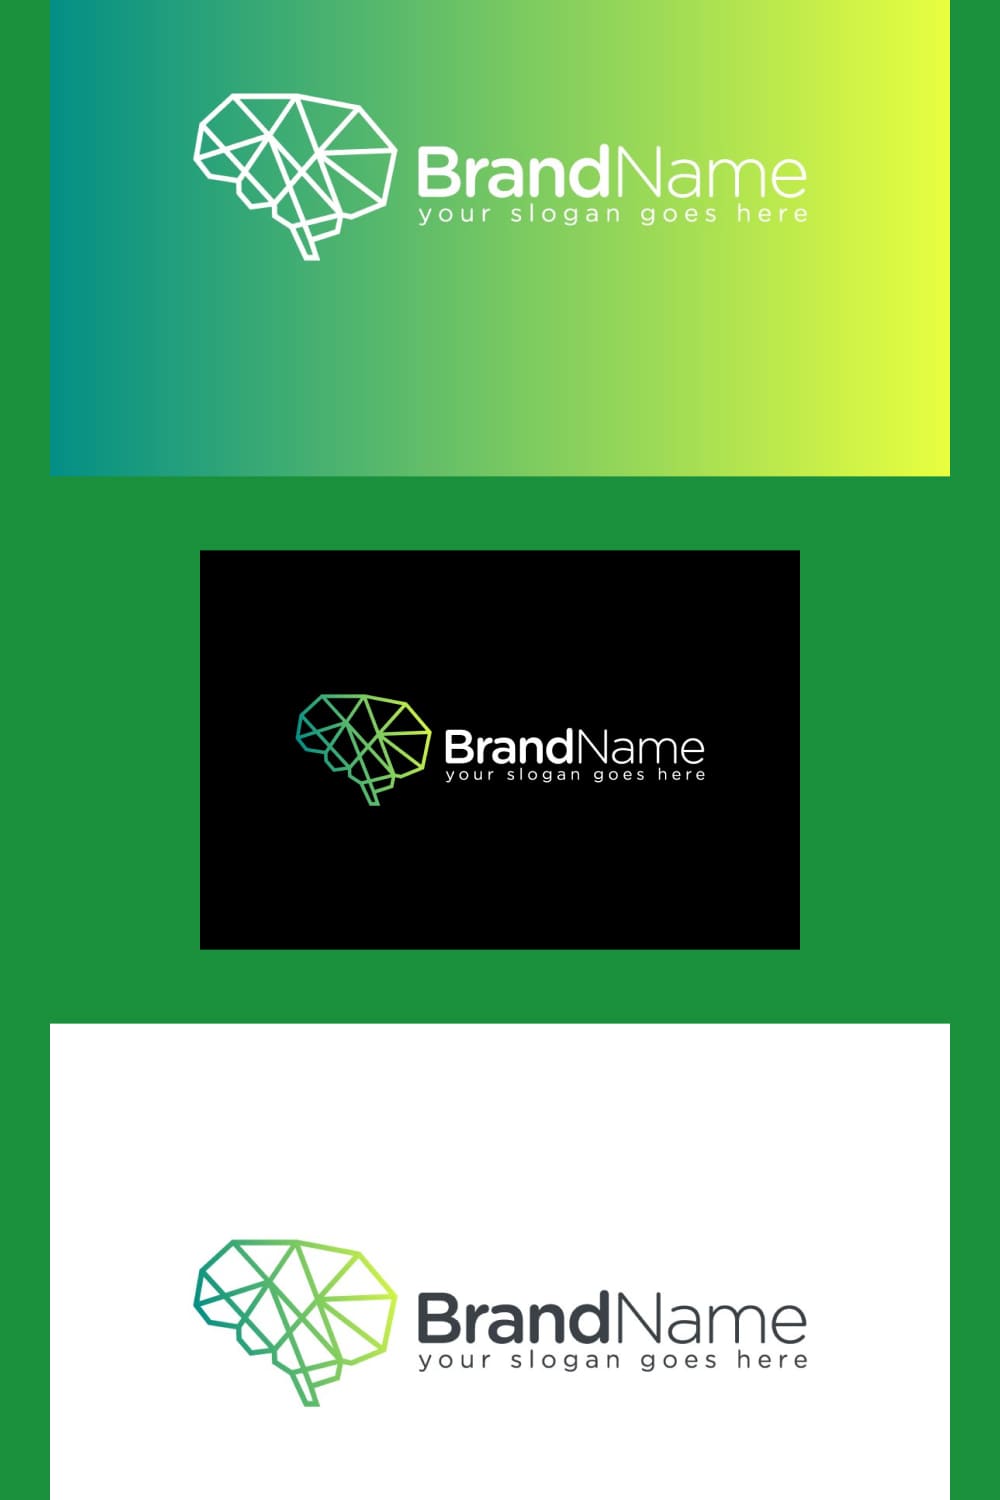 Use this logos for your visual content.